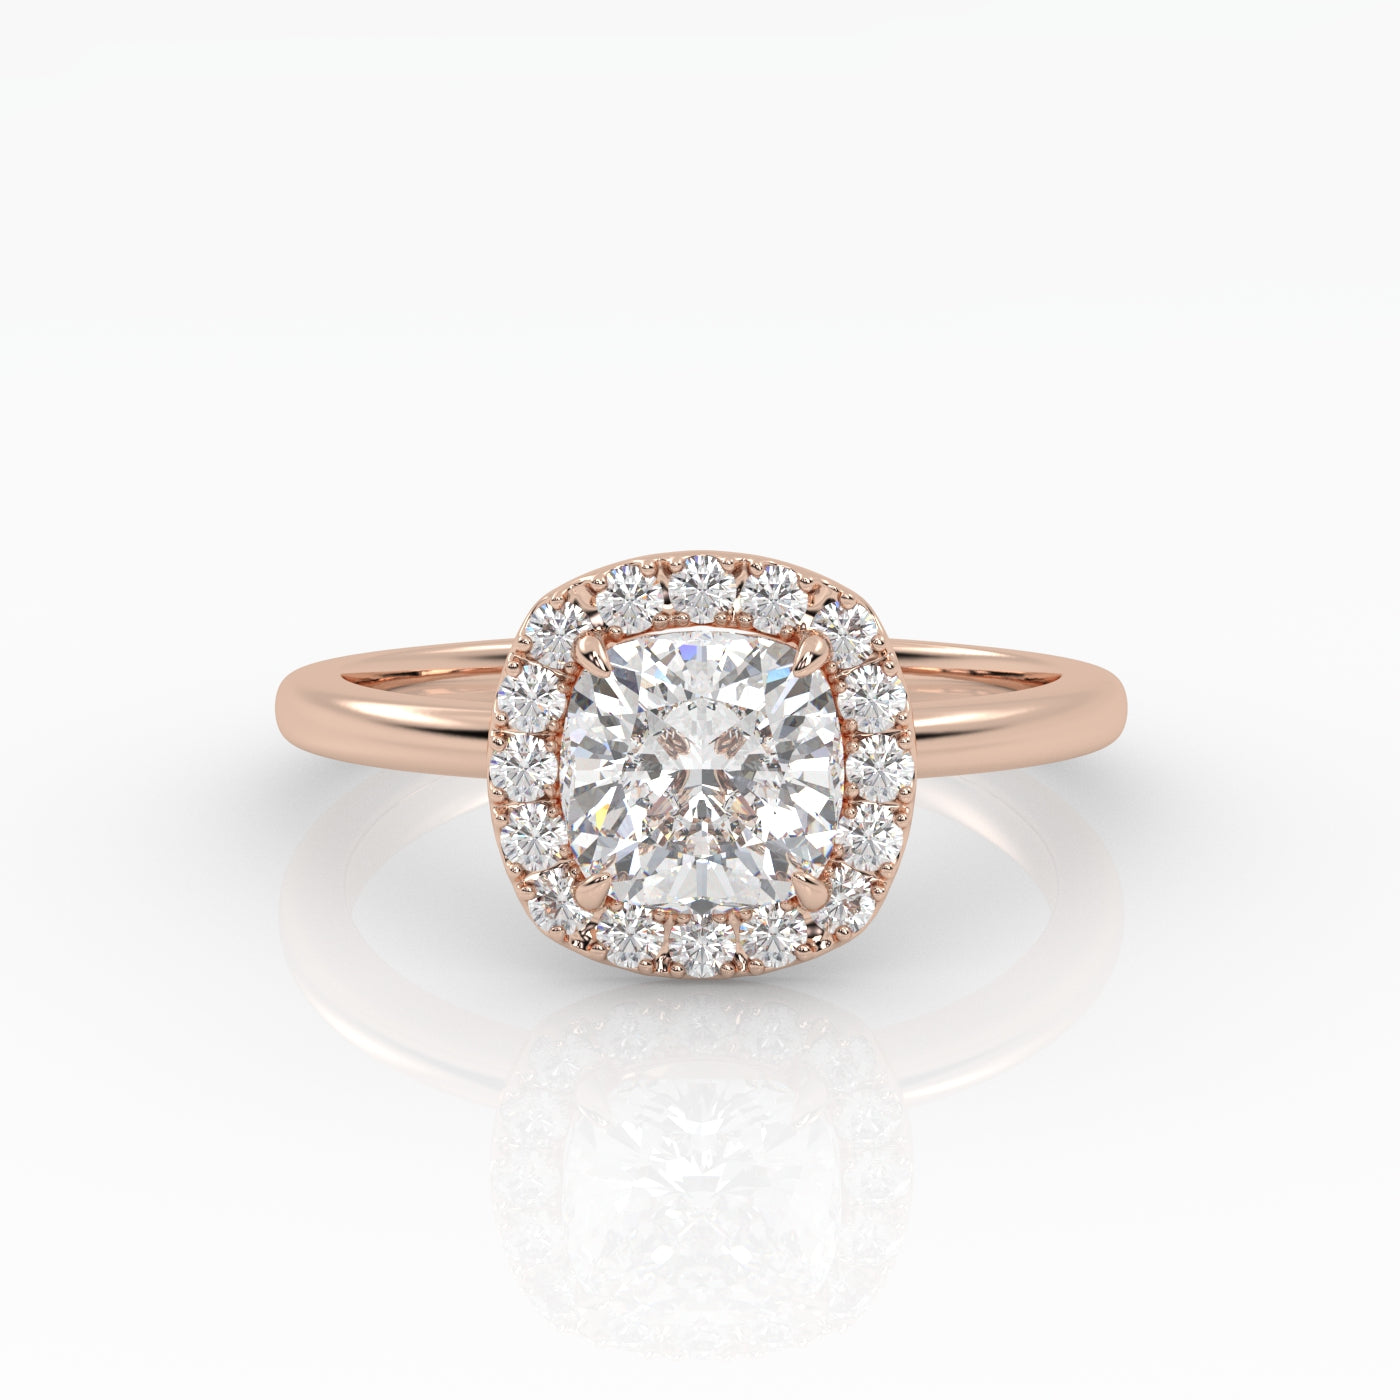 A dazzling cushion-cut diamond nestled on a sparkly halo setting and sophisticated rose gold band. 